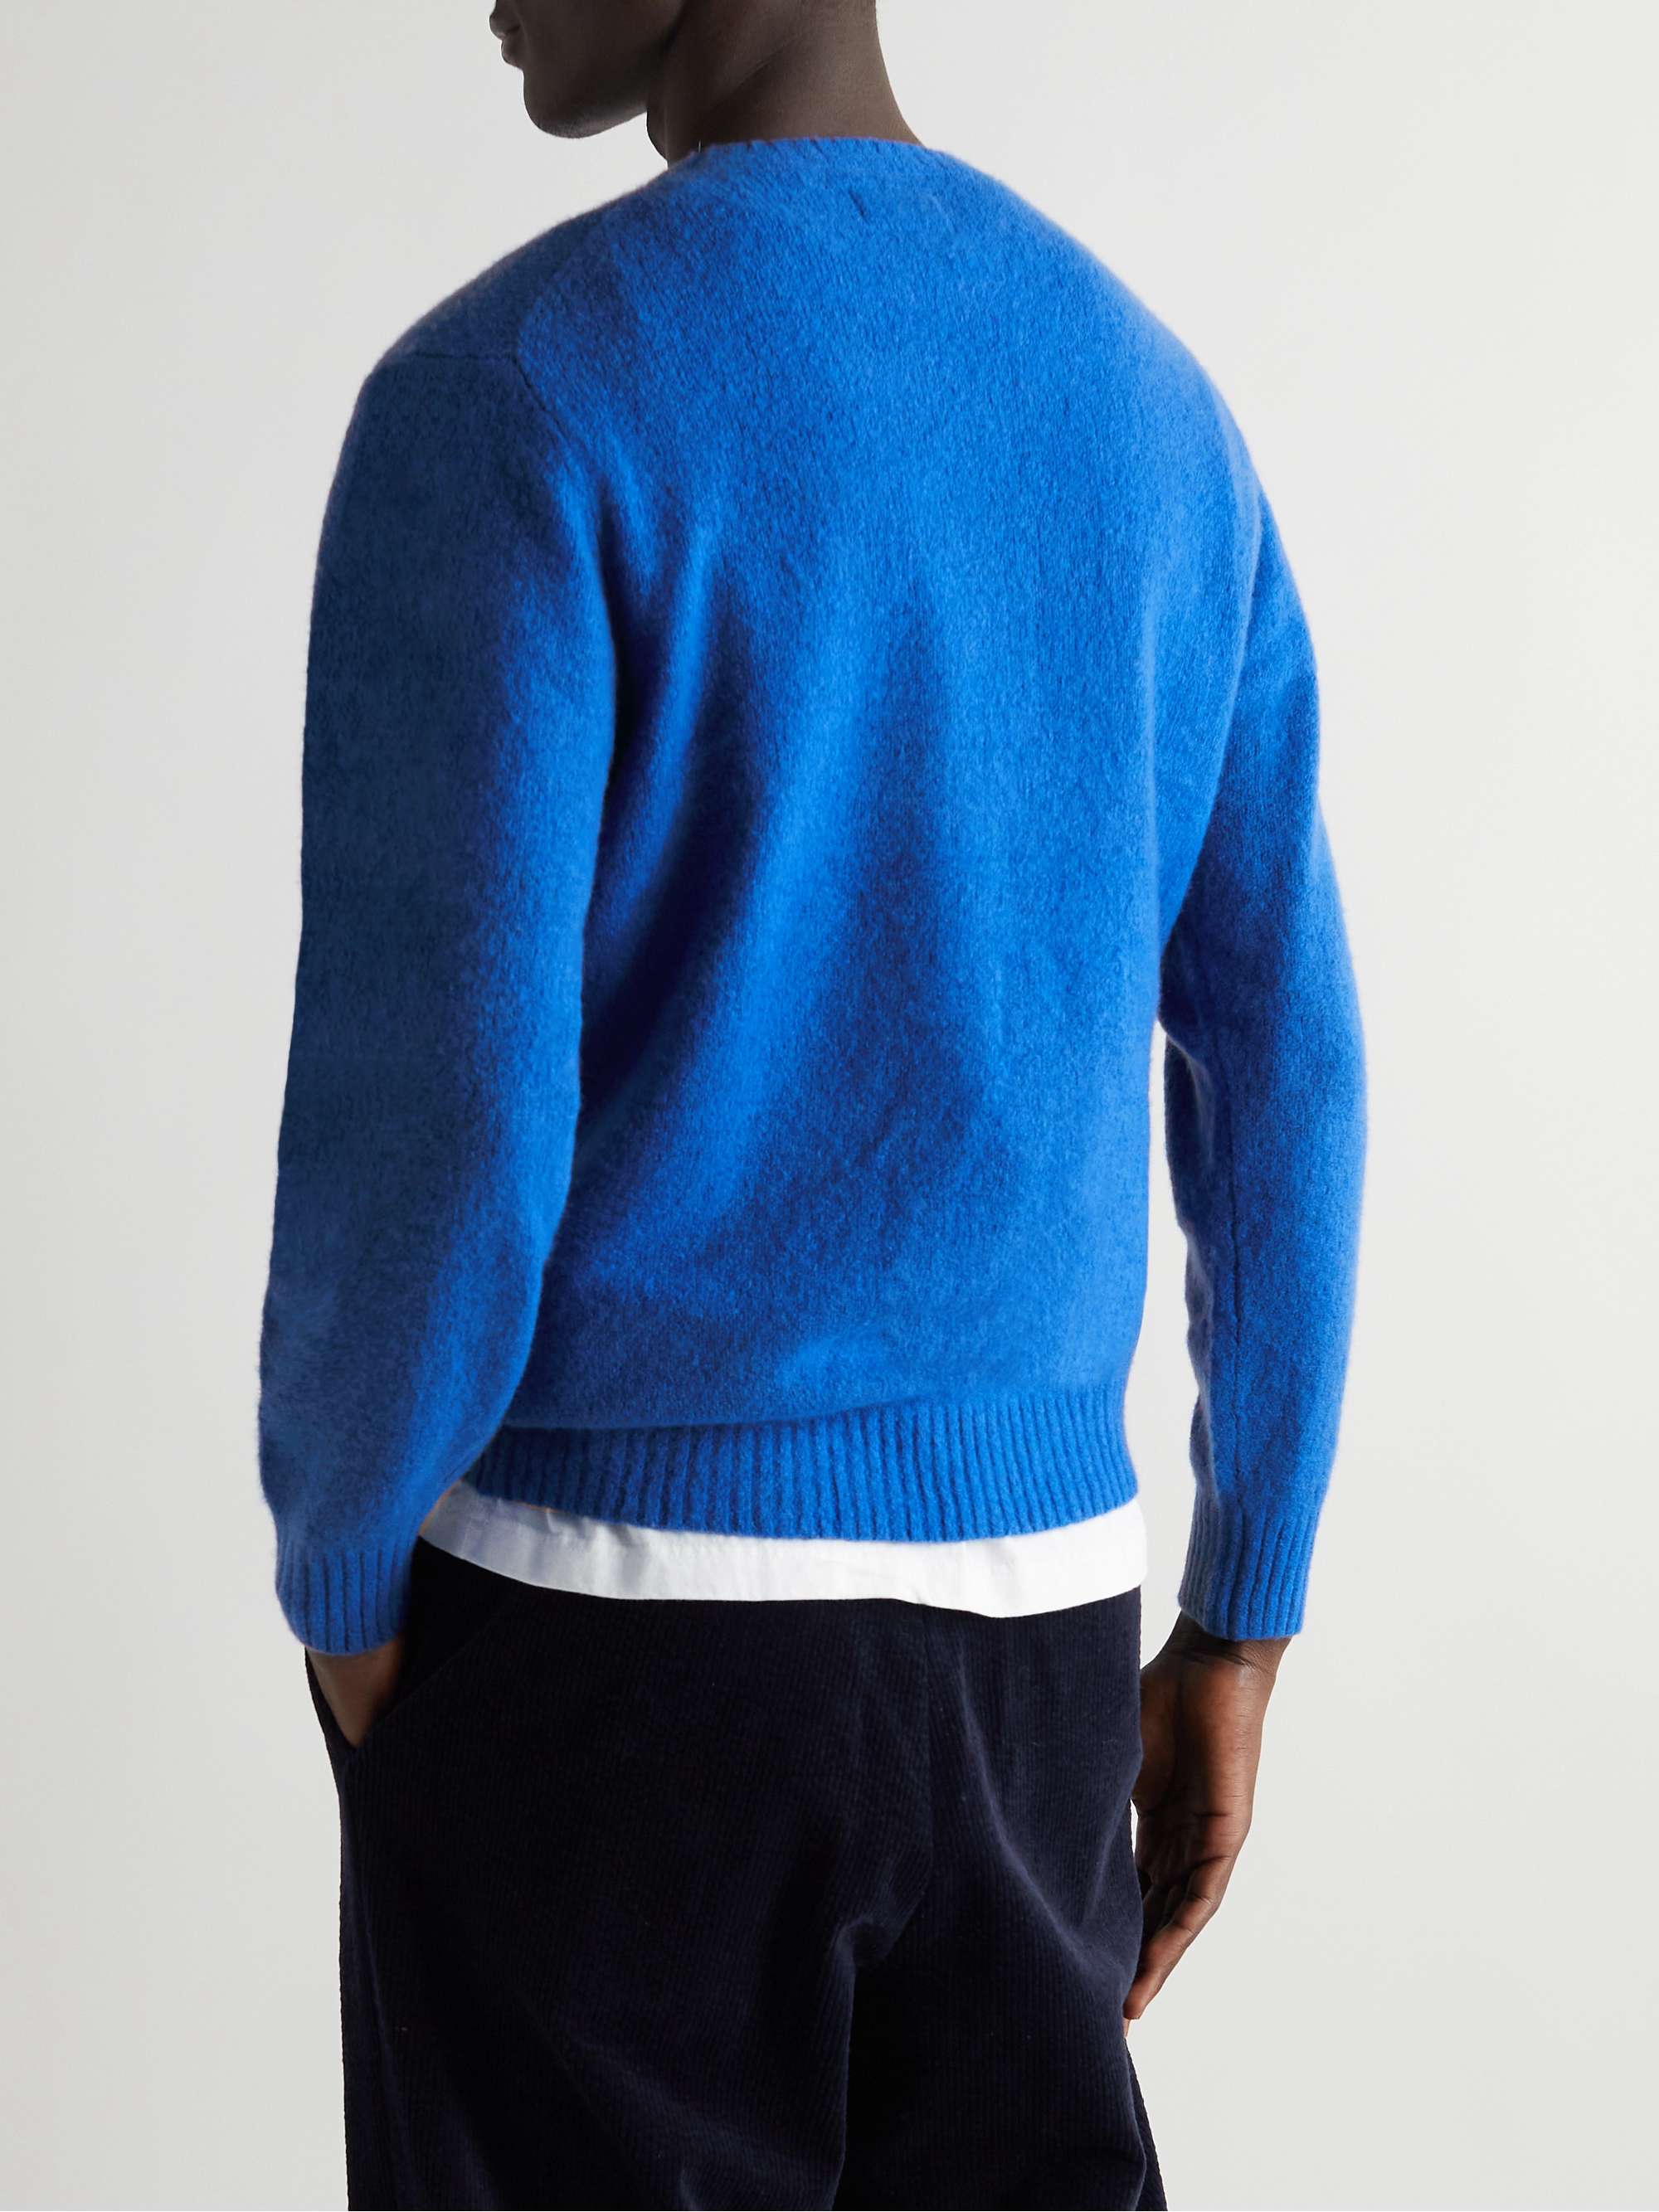 BEAMS PLUS Cashmere and Silk-Blend Sweater